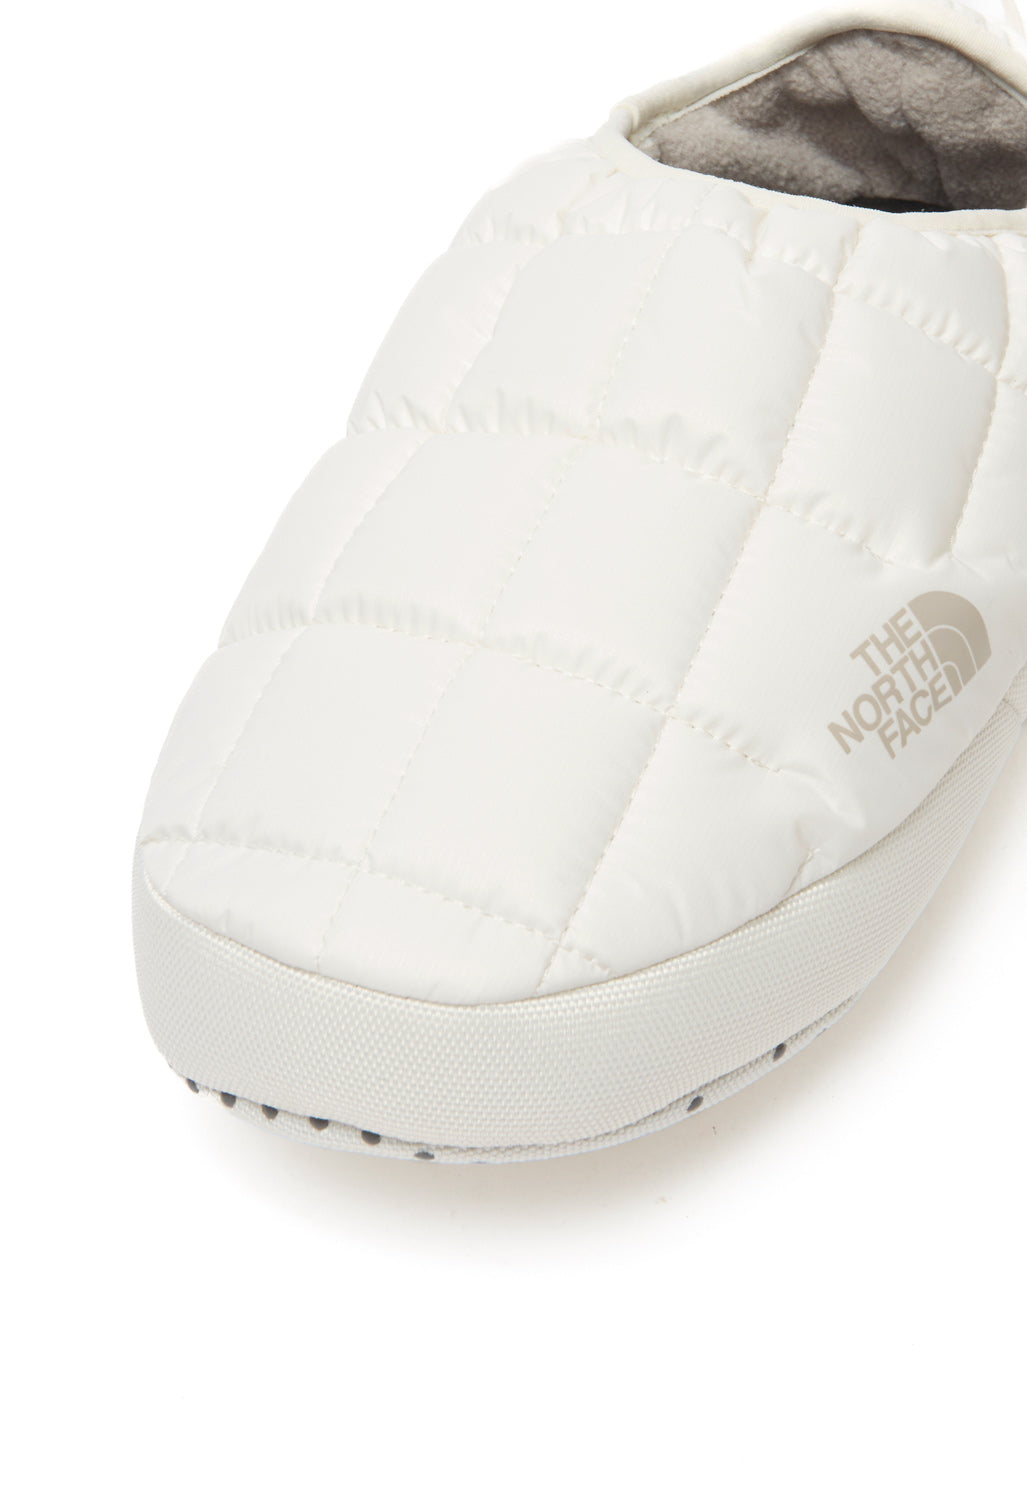 The North Face Women's ThermoBall V Mules - Gardenia White/Silver Grey